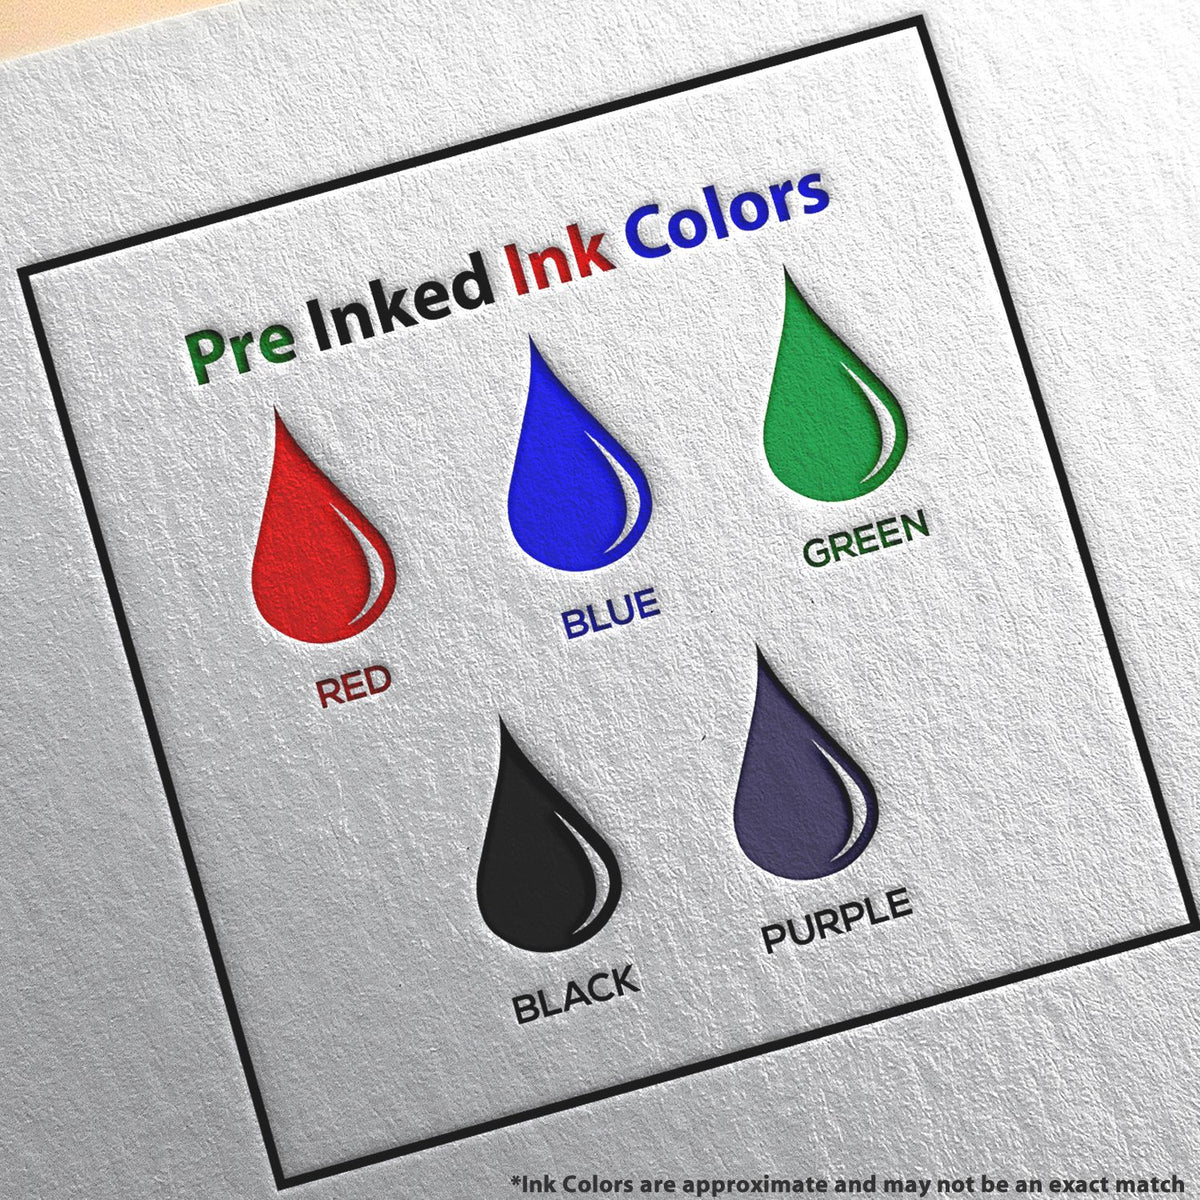 A picture showing the different ink colors or hues available for the Slim Pre-Inked West Virginia Land Surveyor Seal Stamp product.